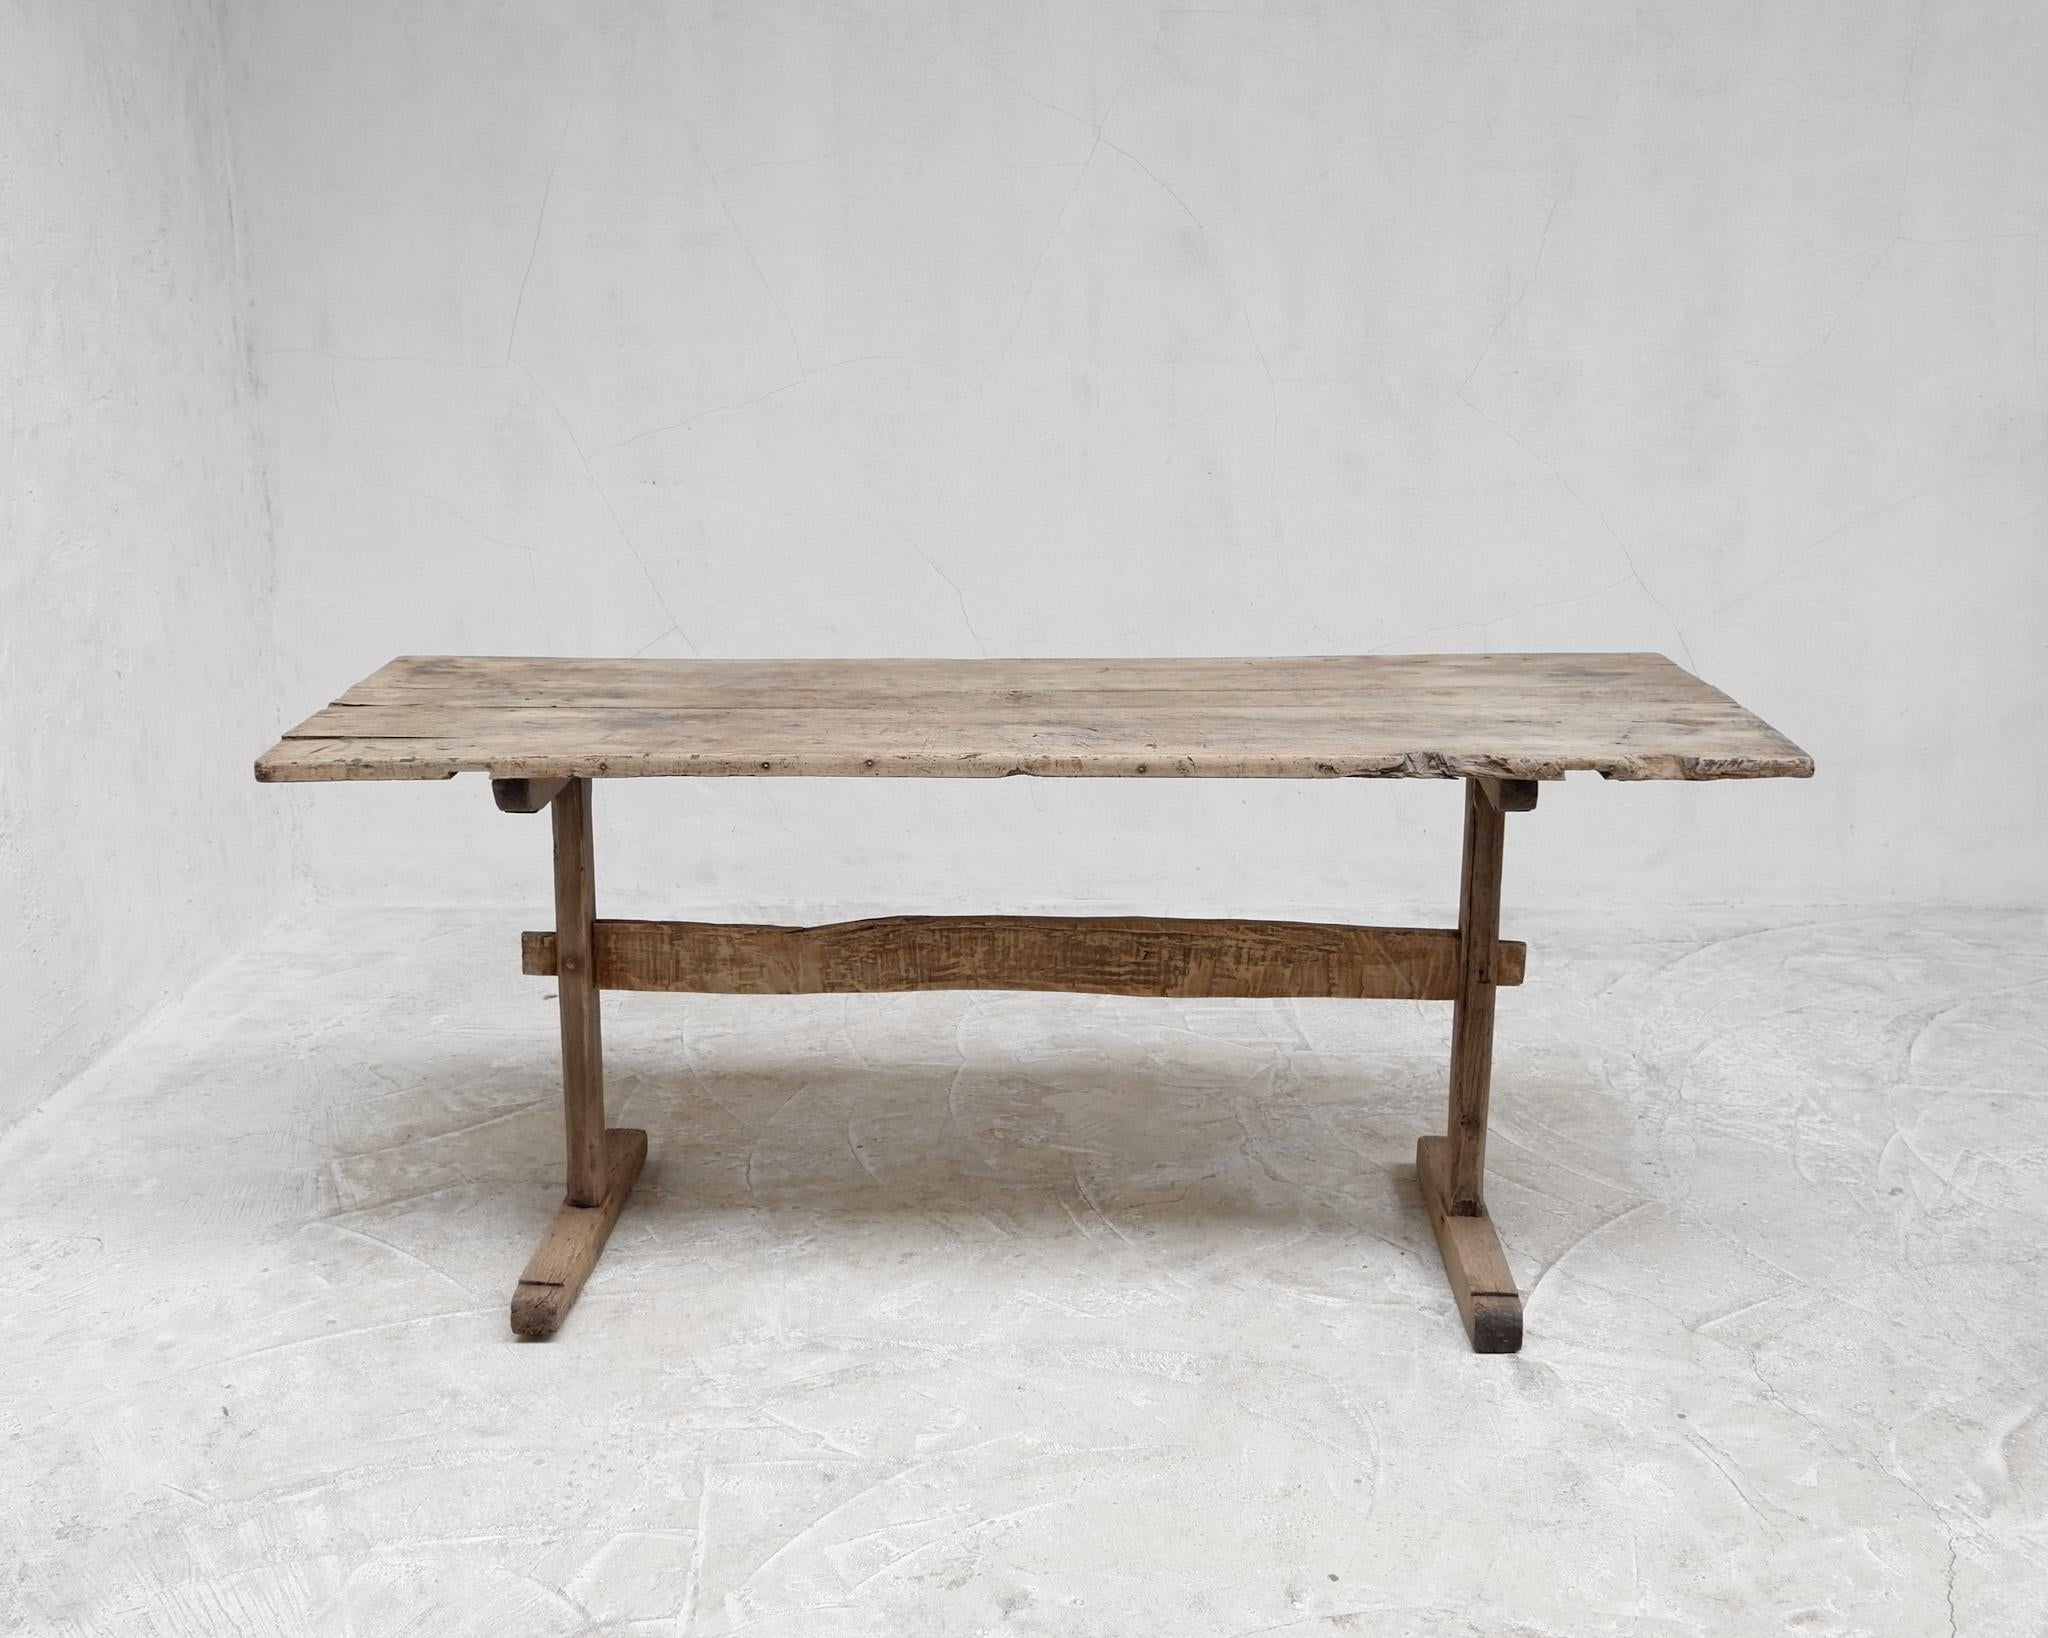 A rare early 19th C. northern Italian “T” table.

Aesthetically pleasing utilitarian design.

Lovely washed-out colour.

-

We offer free shipping to the USA/Canada through Fedex with this item.